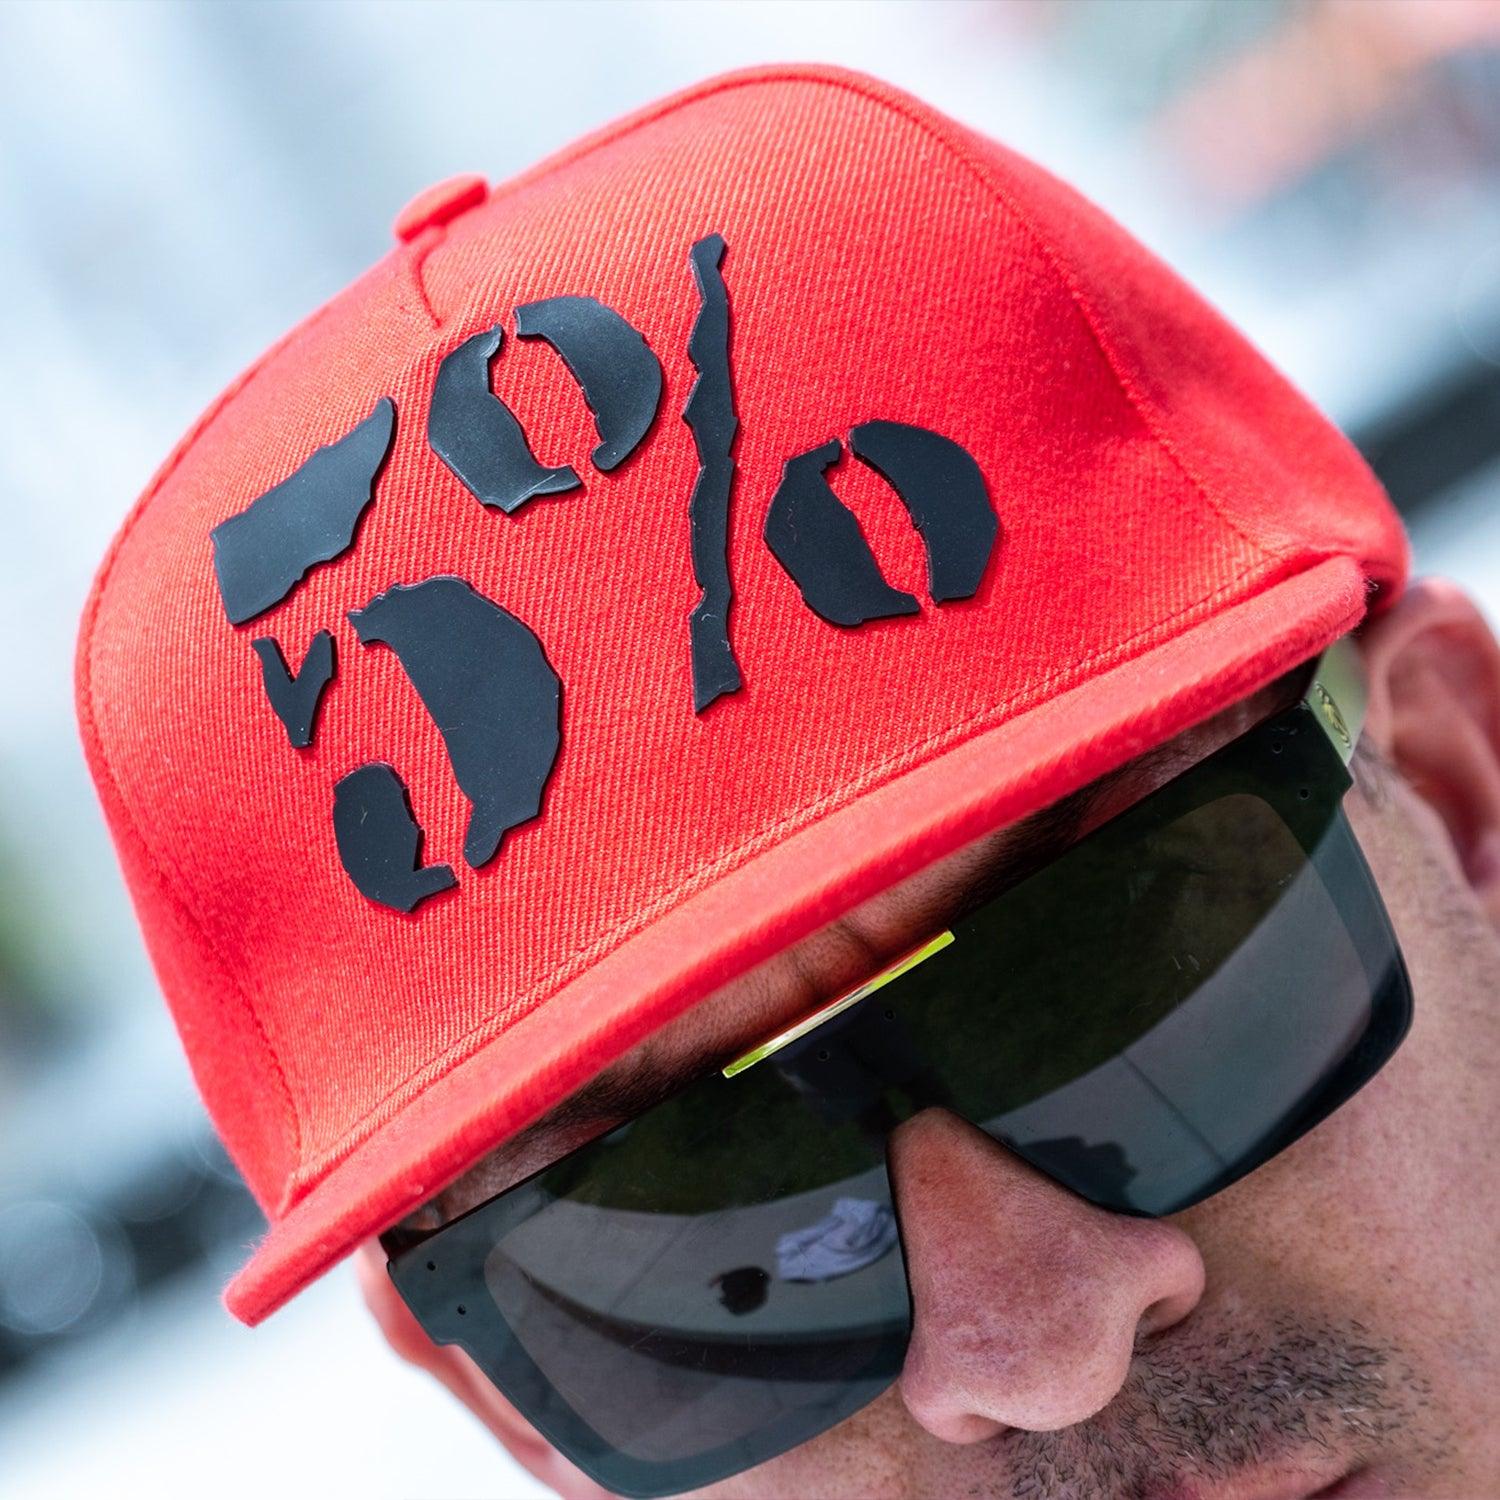 5% Rubber Logo, Red Hat with Black Lettering - 5% Nutrition